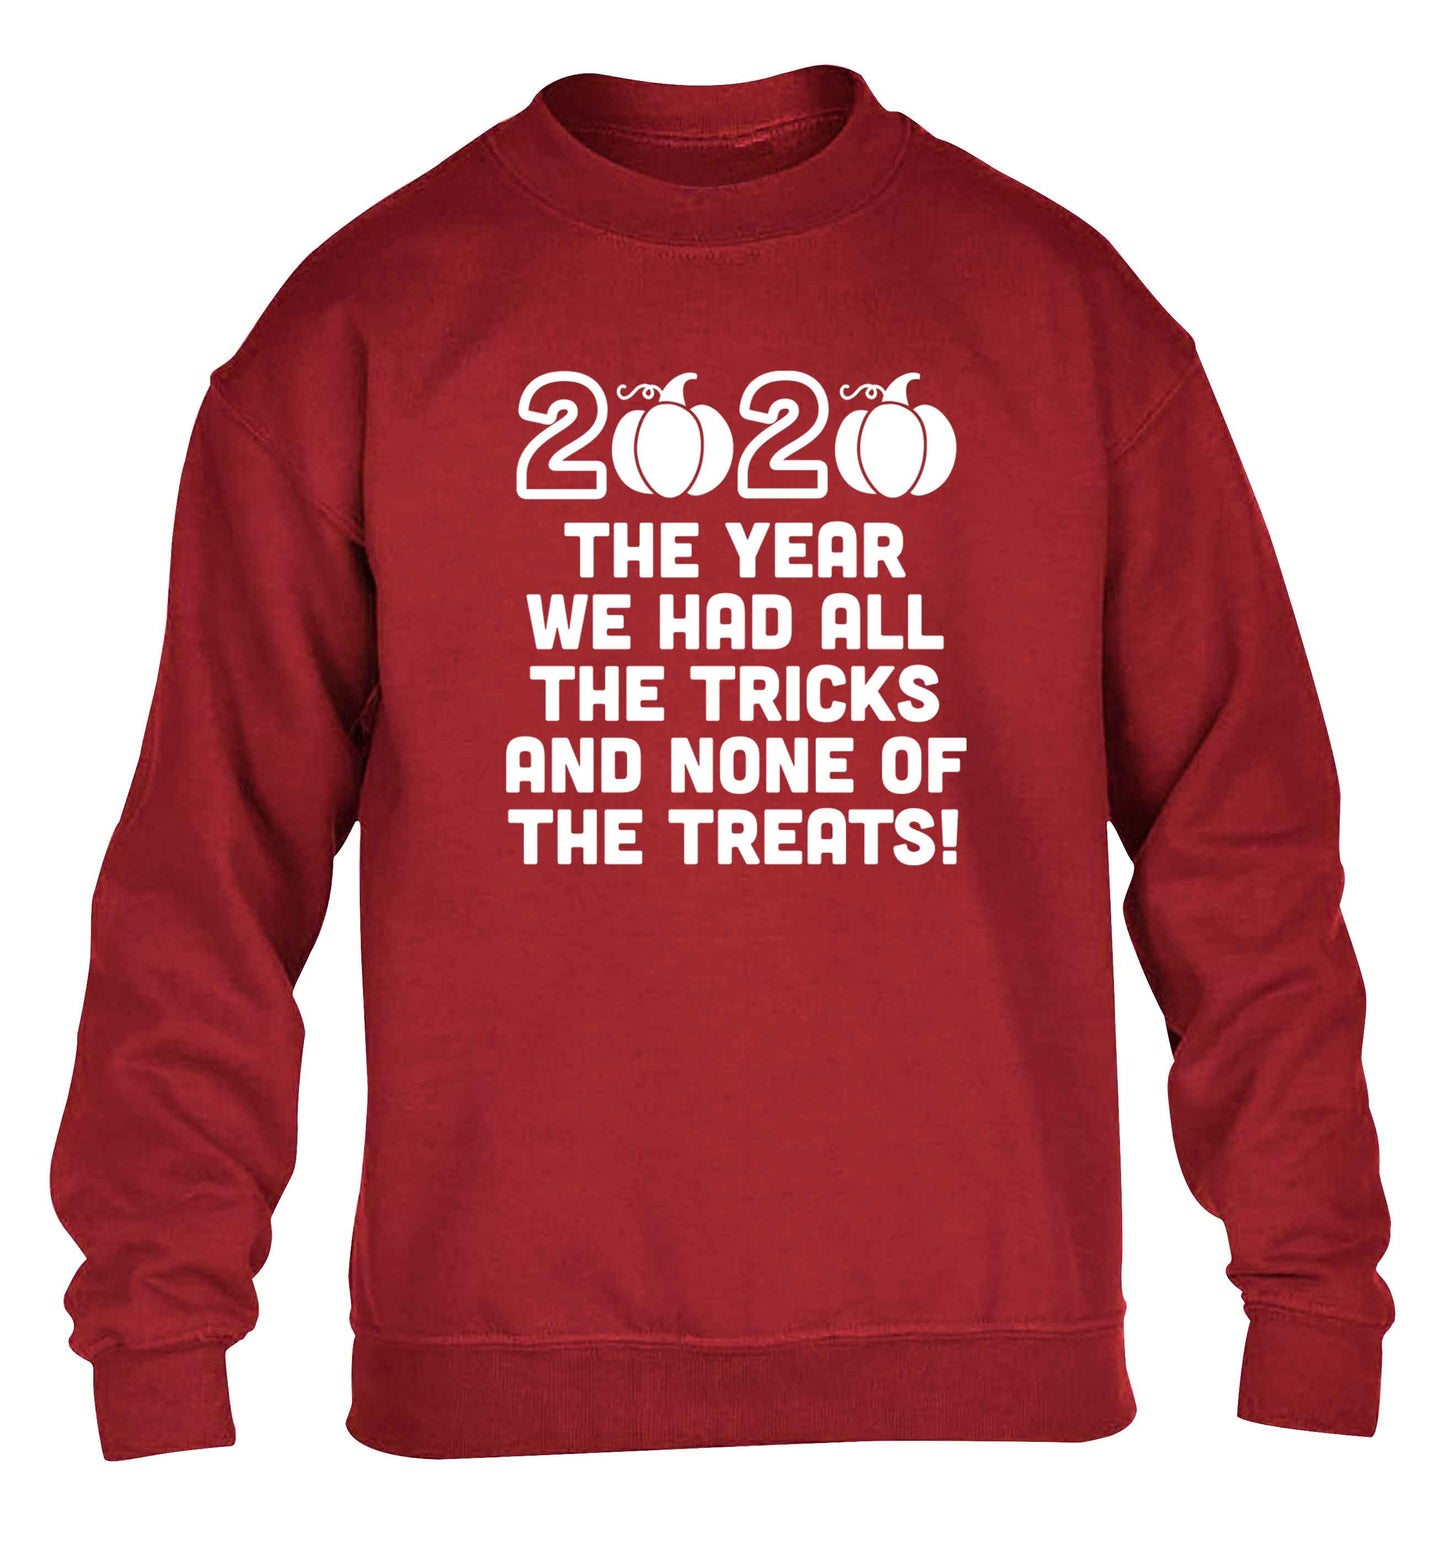 2020 The year we had all of the tricks and none of the treats children's grey sweater 12-13 Years